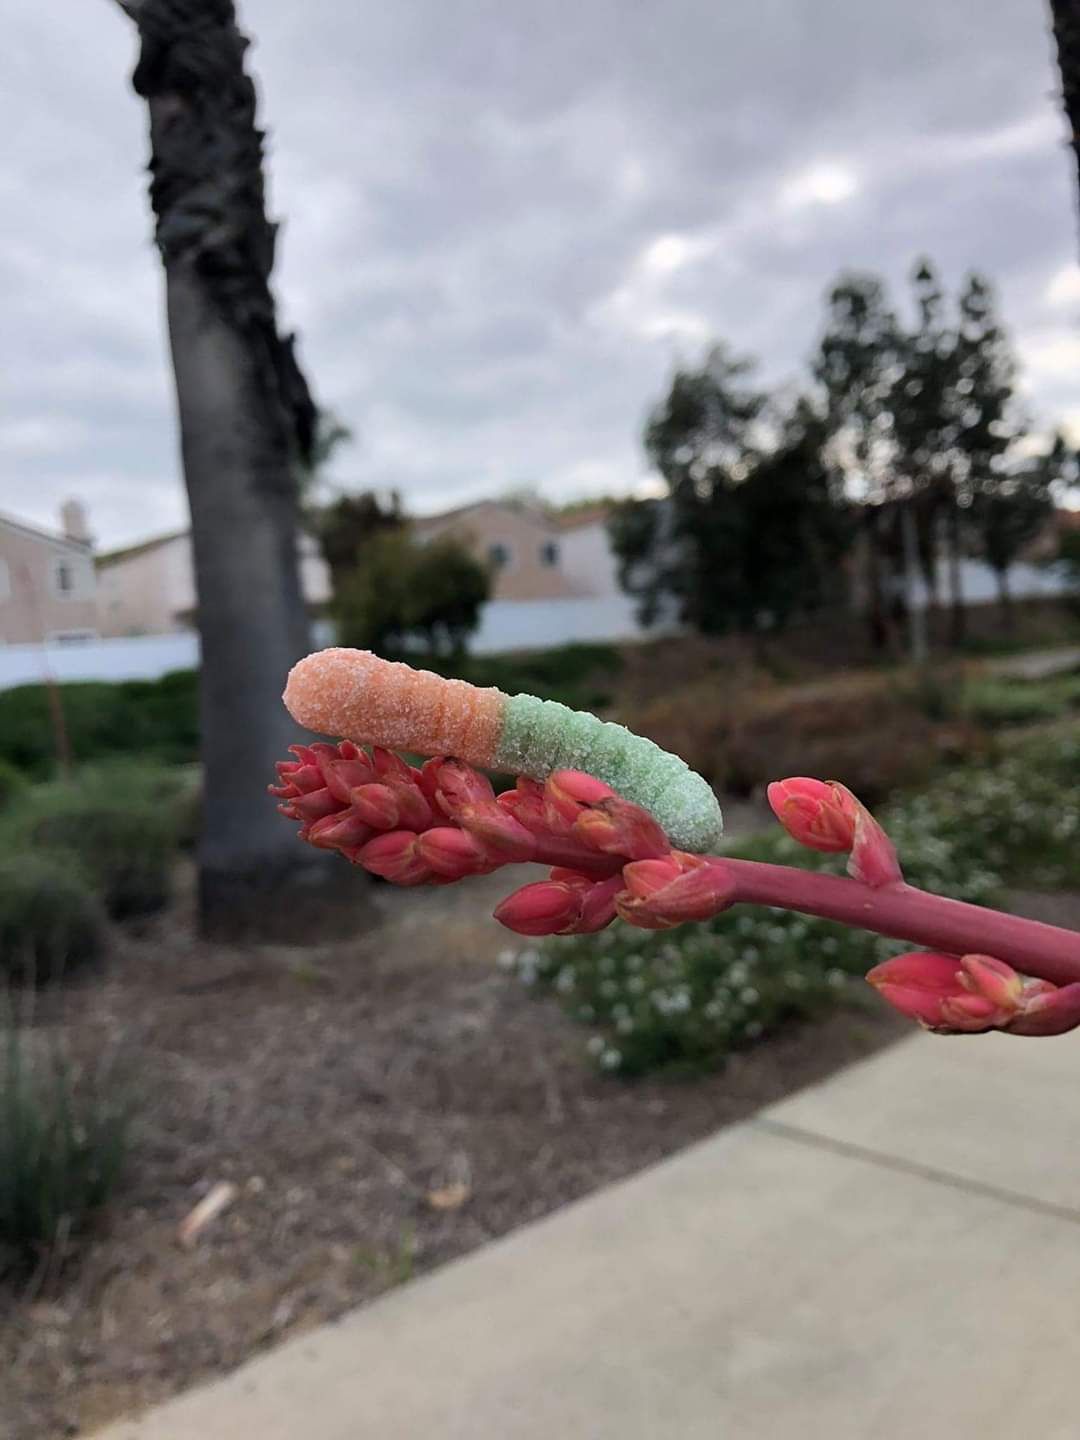 The rather friendly gummy worm which is rarely seen in its natural habitat.